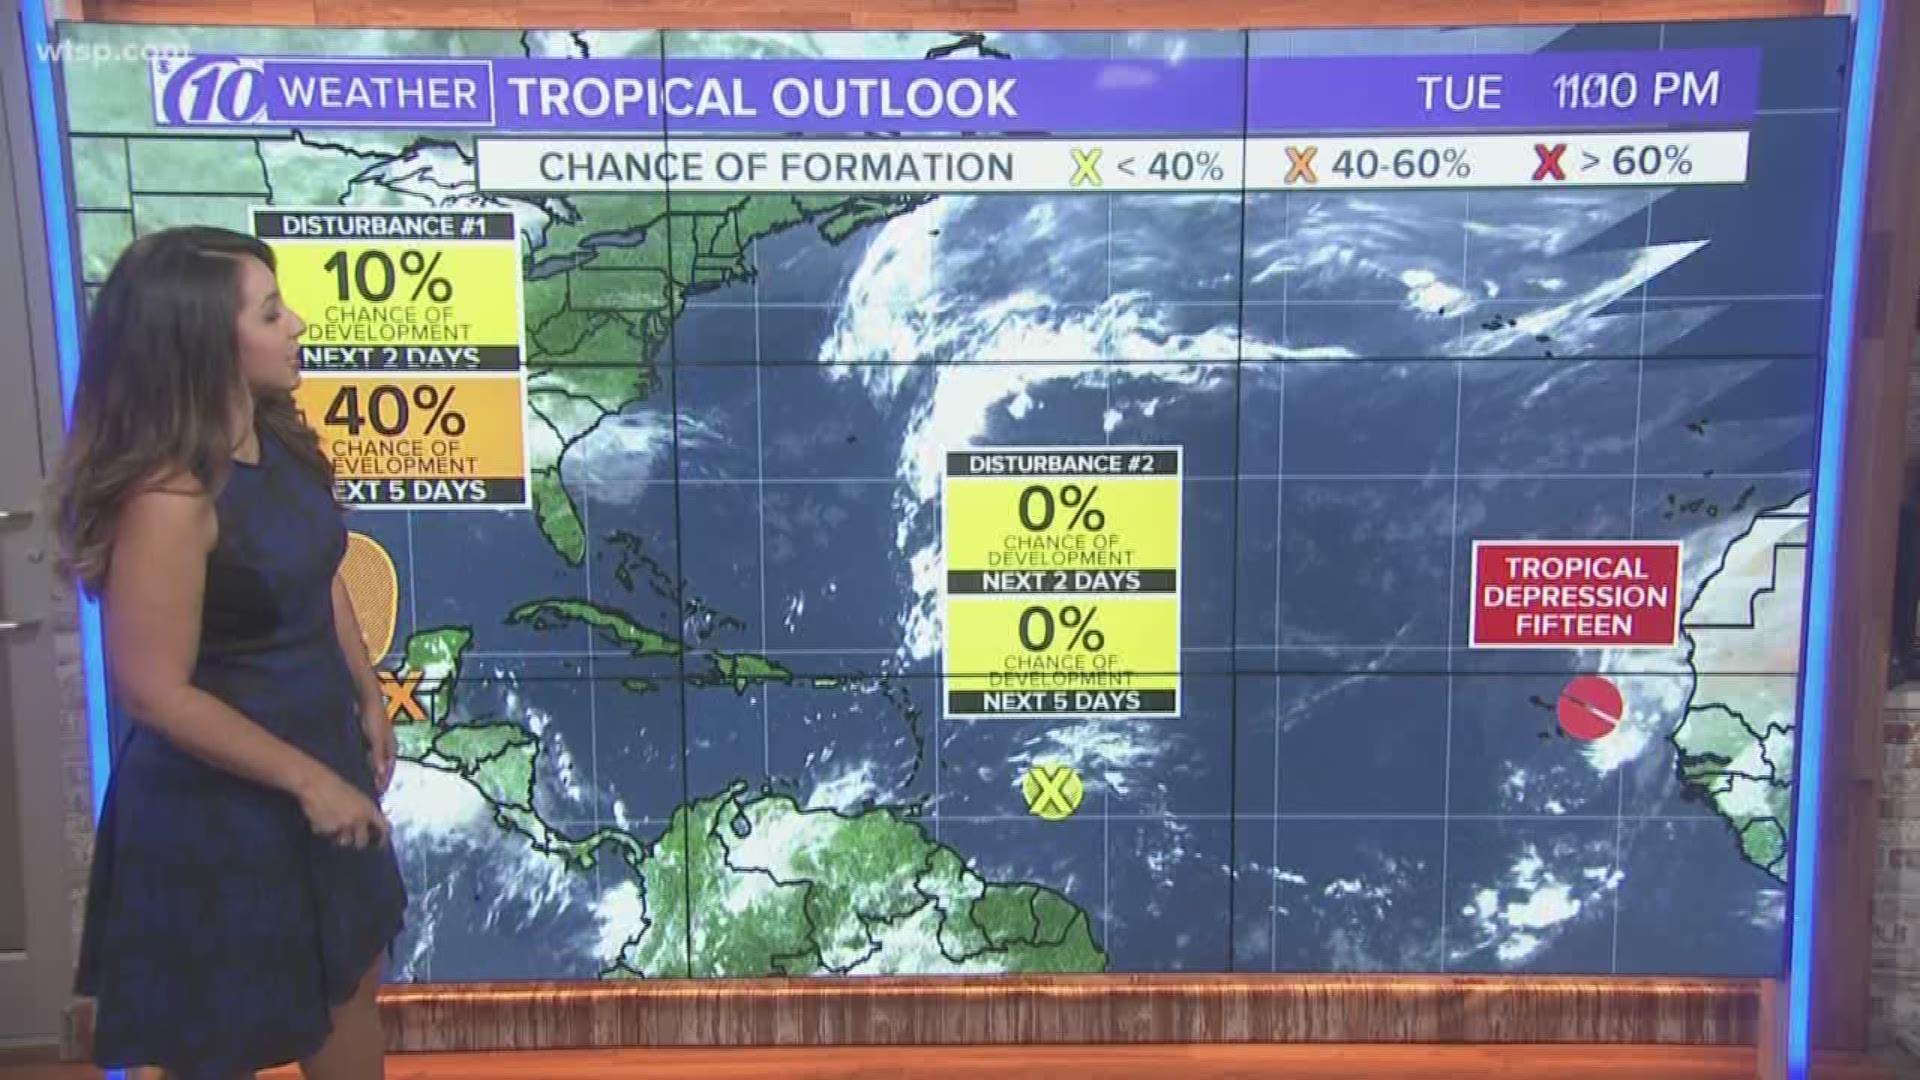 We're keeping an eye on it as it develops along with other tropical disturbances.